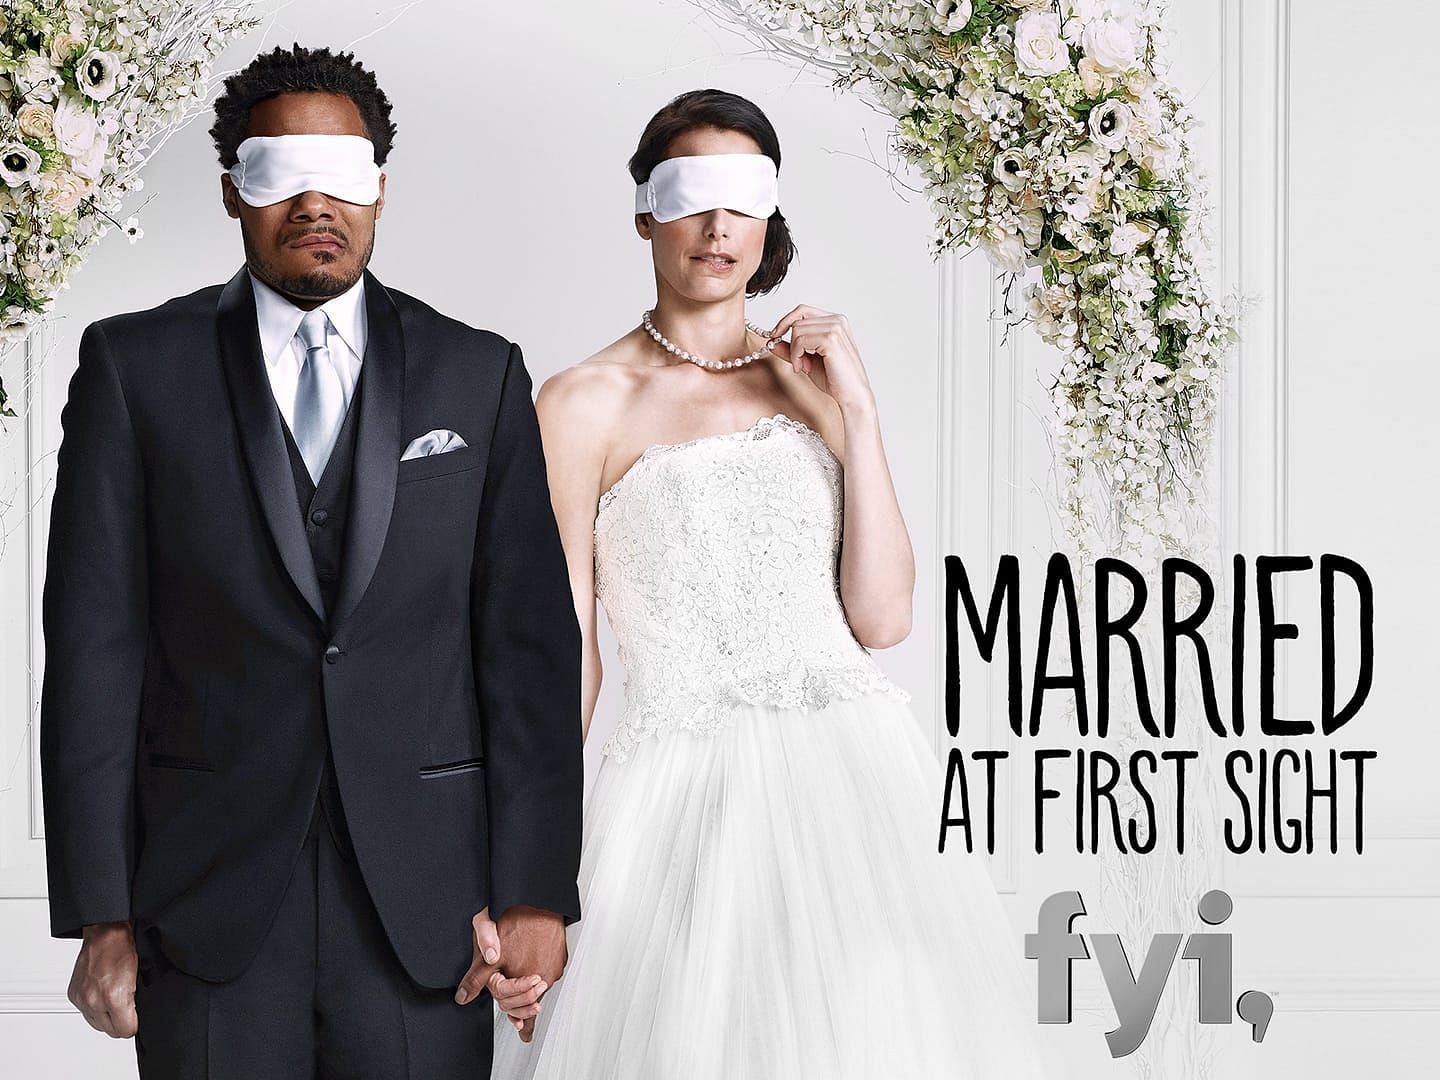 Married at First Sight (Image via FYI)